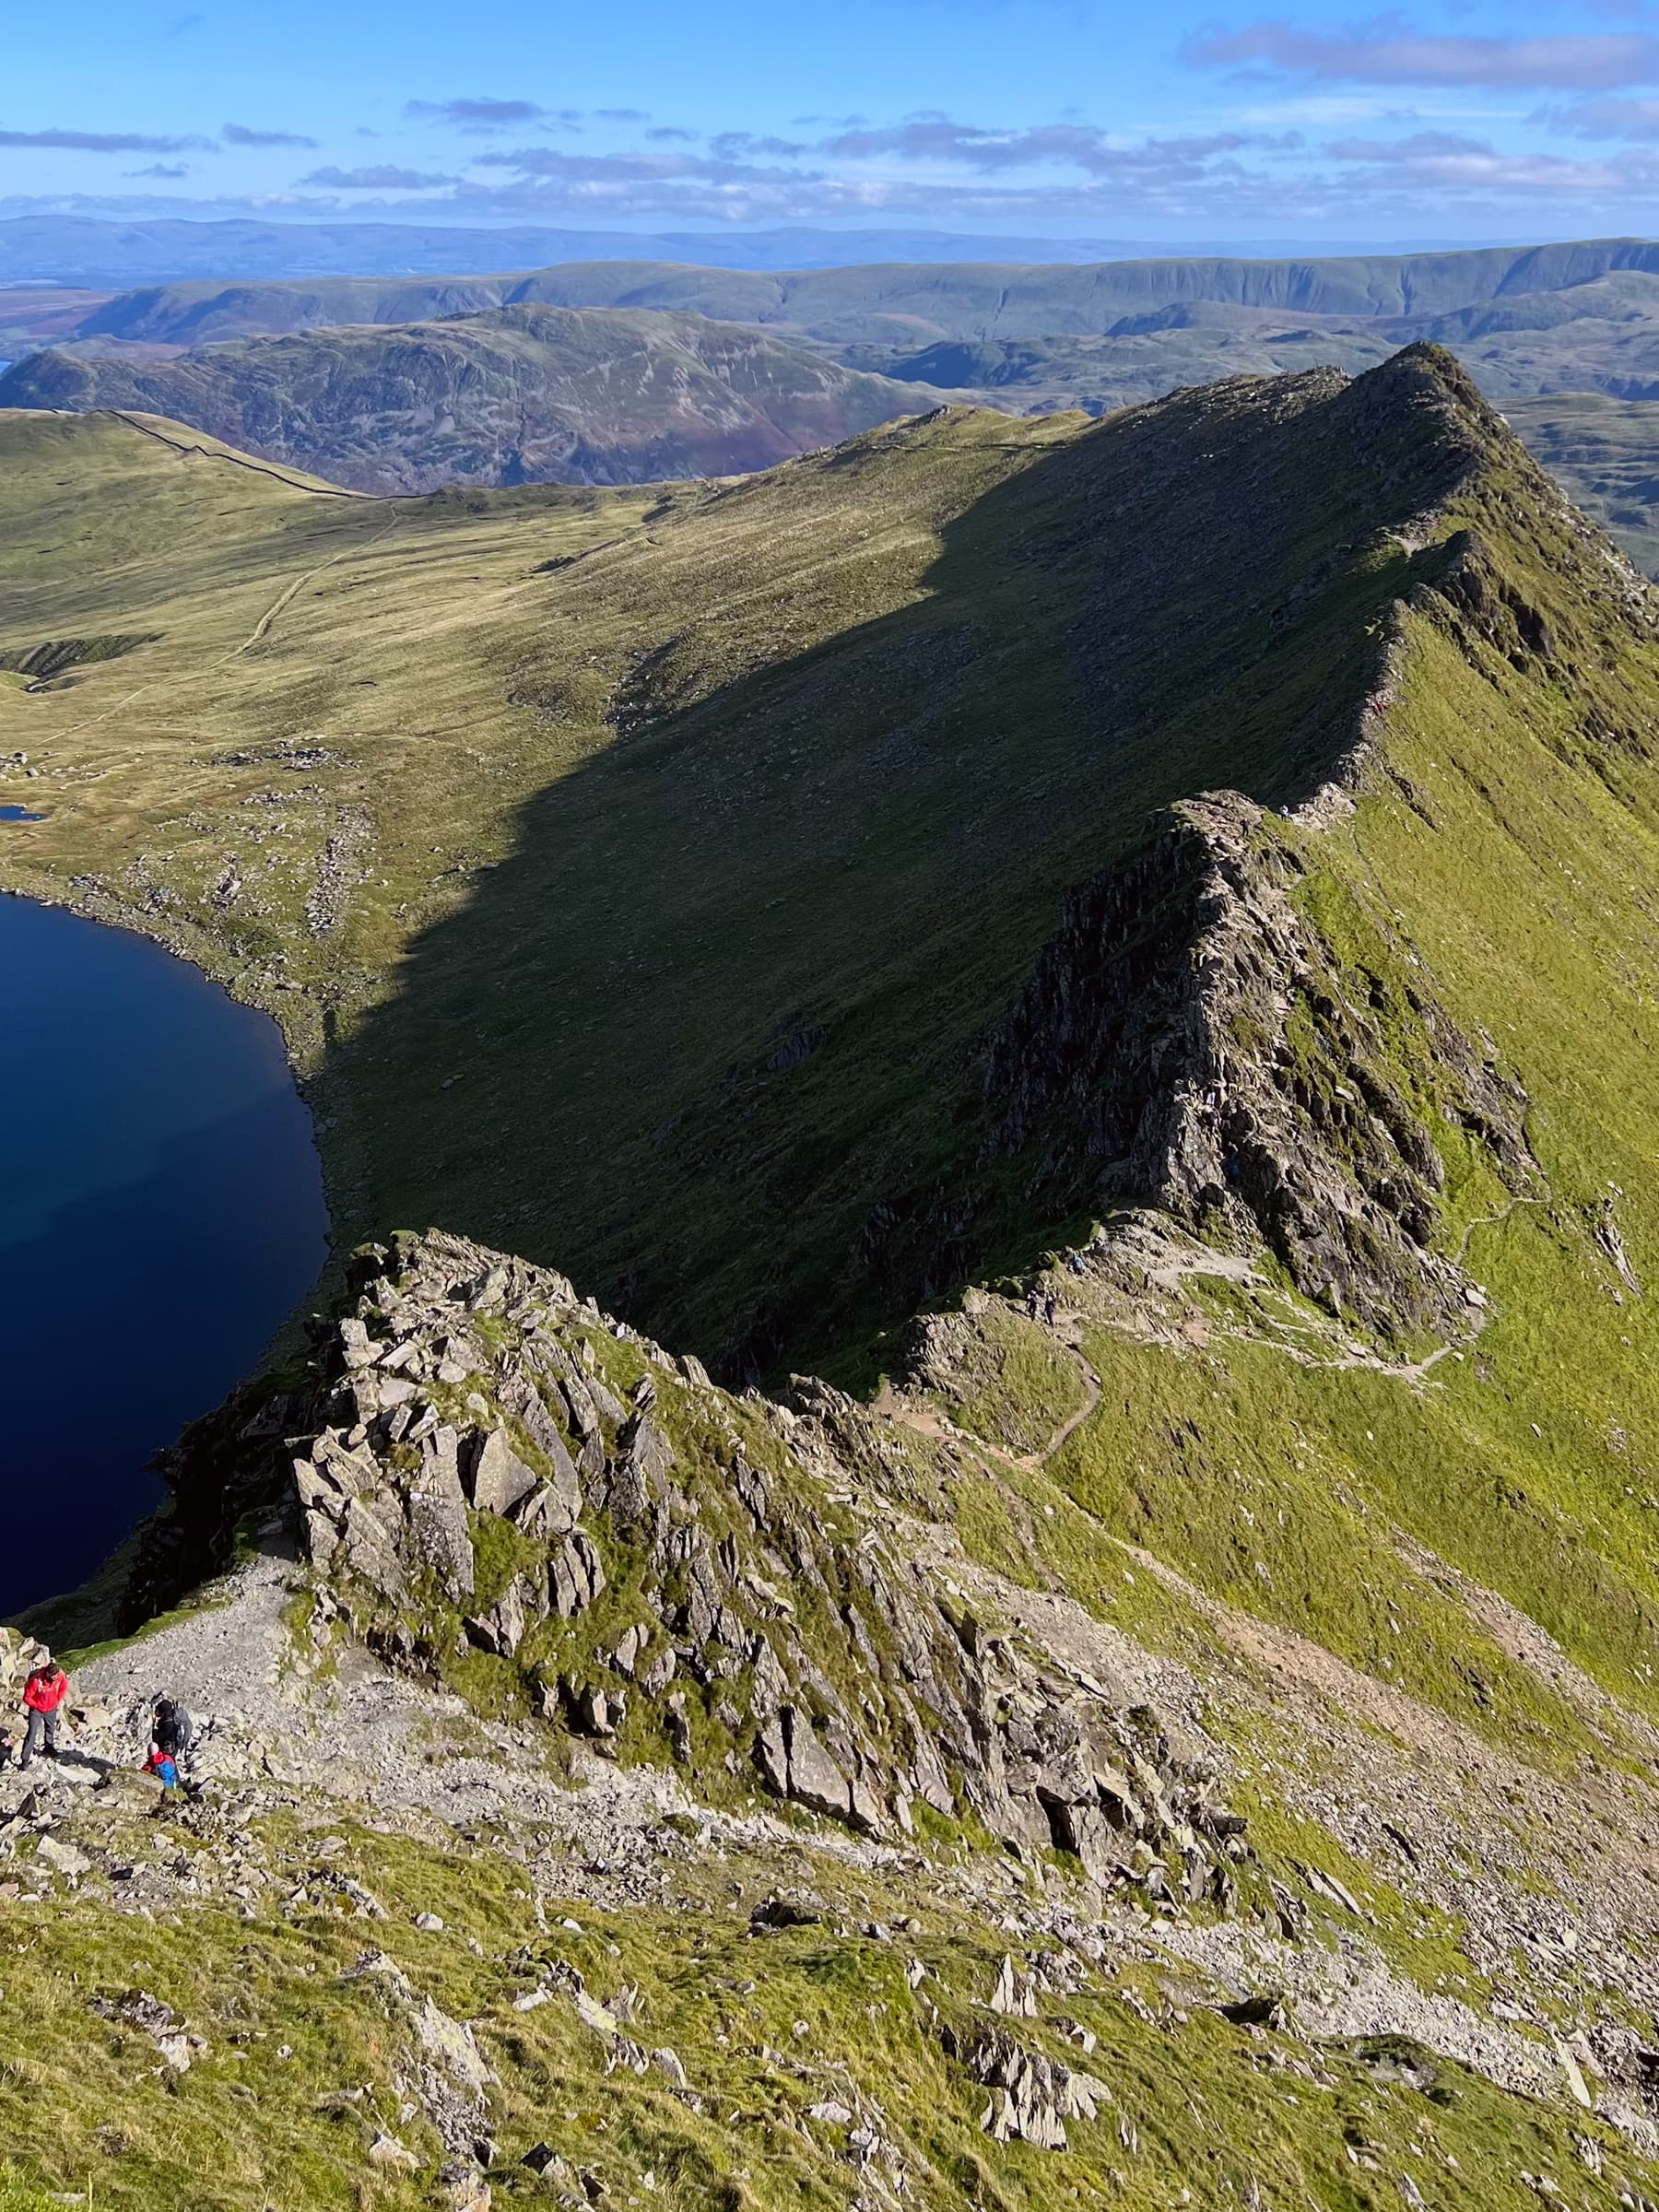 Image of Striding Edge, a knife edge of rock from halfway up the Helvellyn side. There are climbers, small, in the foreground and the Lake District mountains can be seen in the distance.